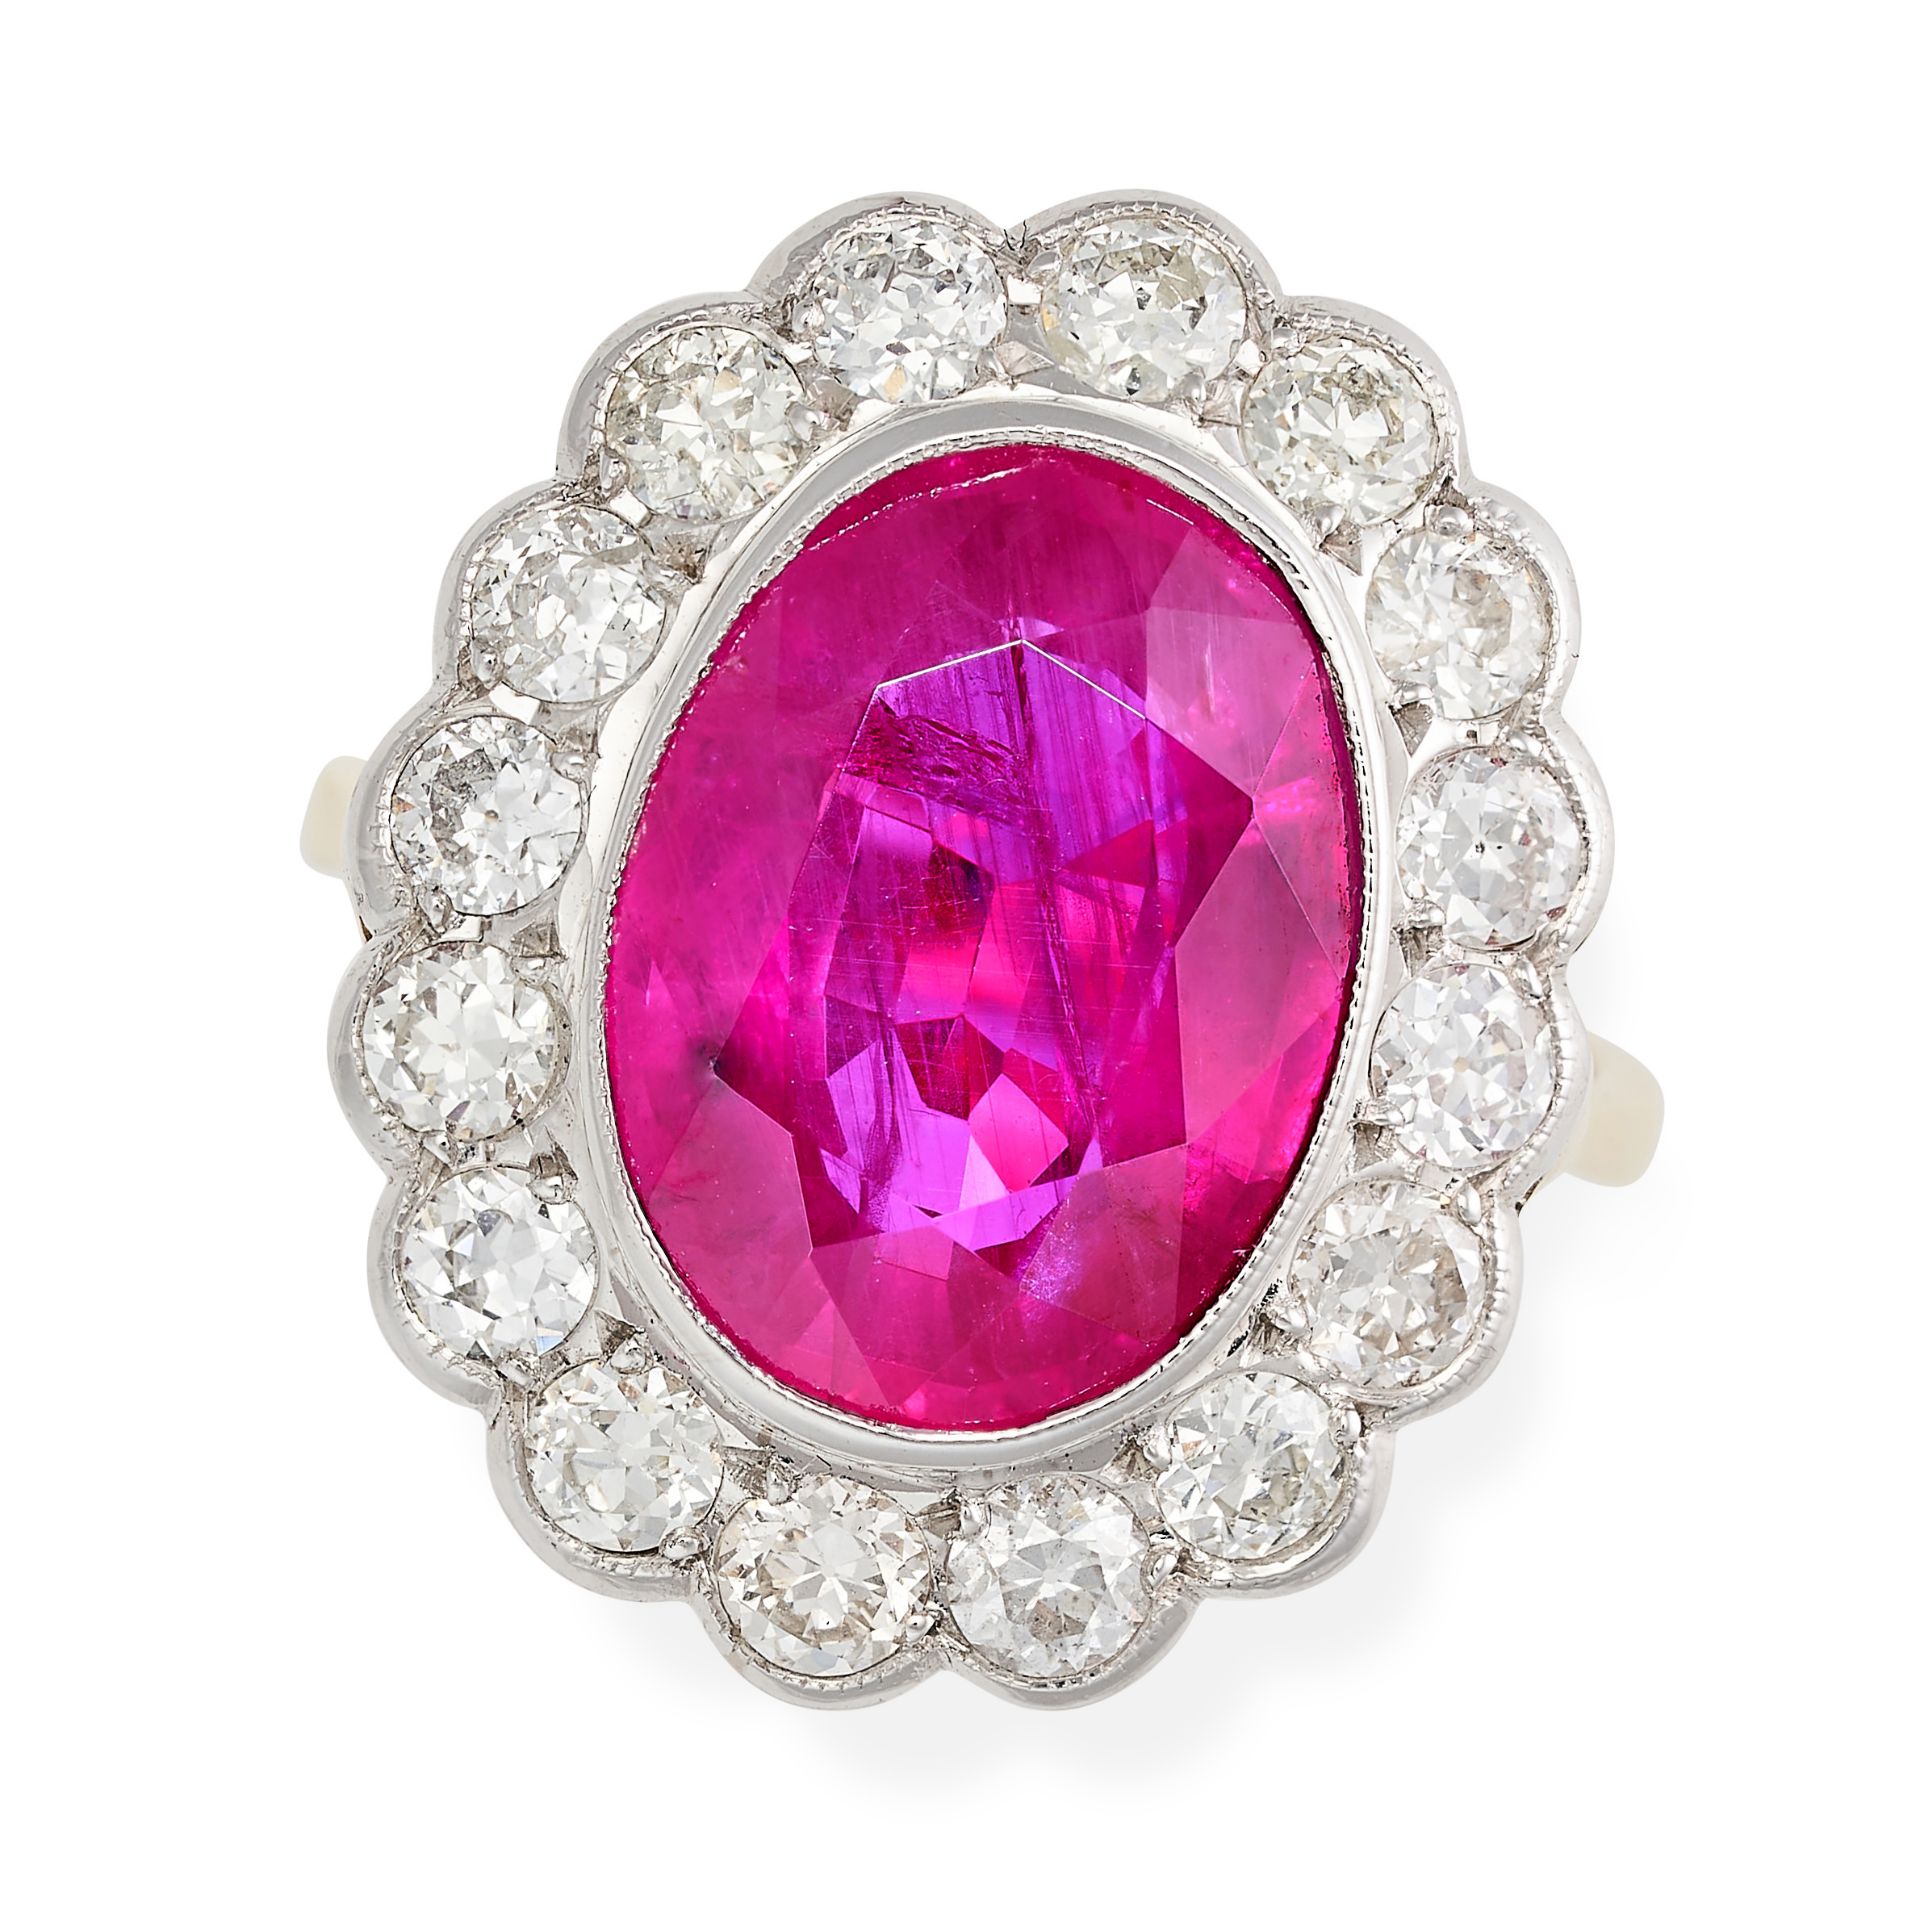 A RUBY AND DIAMOND CLUSTER RING in 18ct yellow gold, set with an oval cut ruby of approximately 7.05